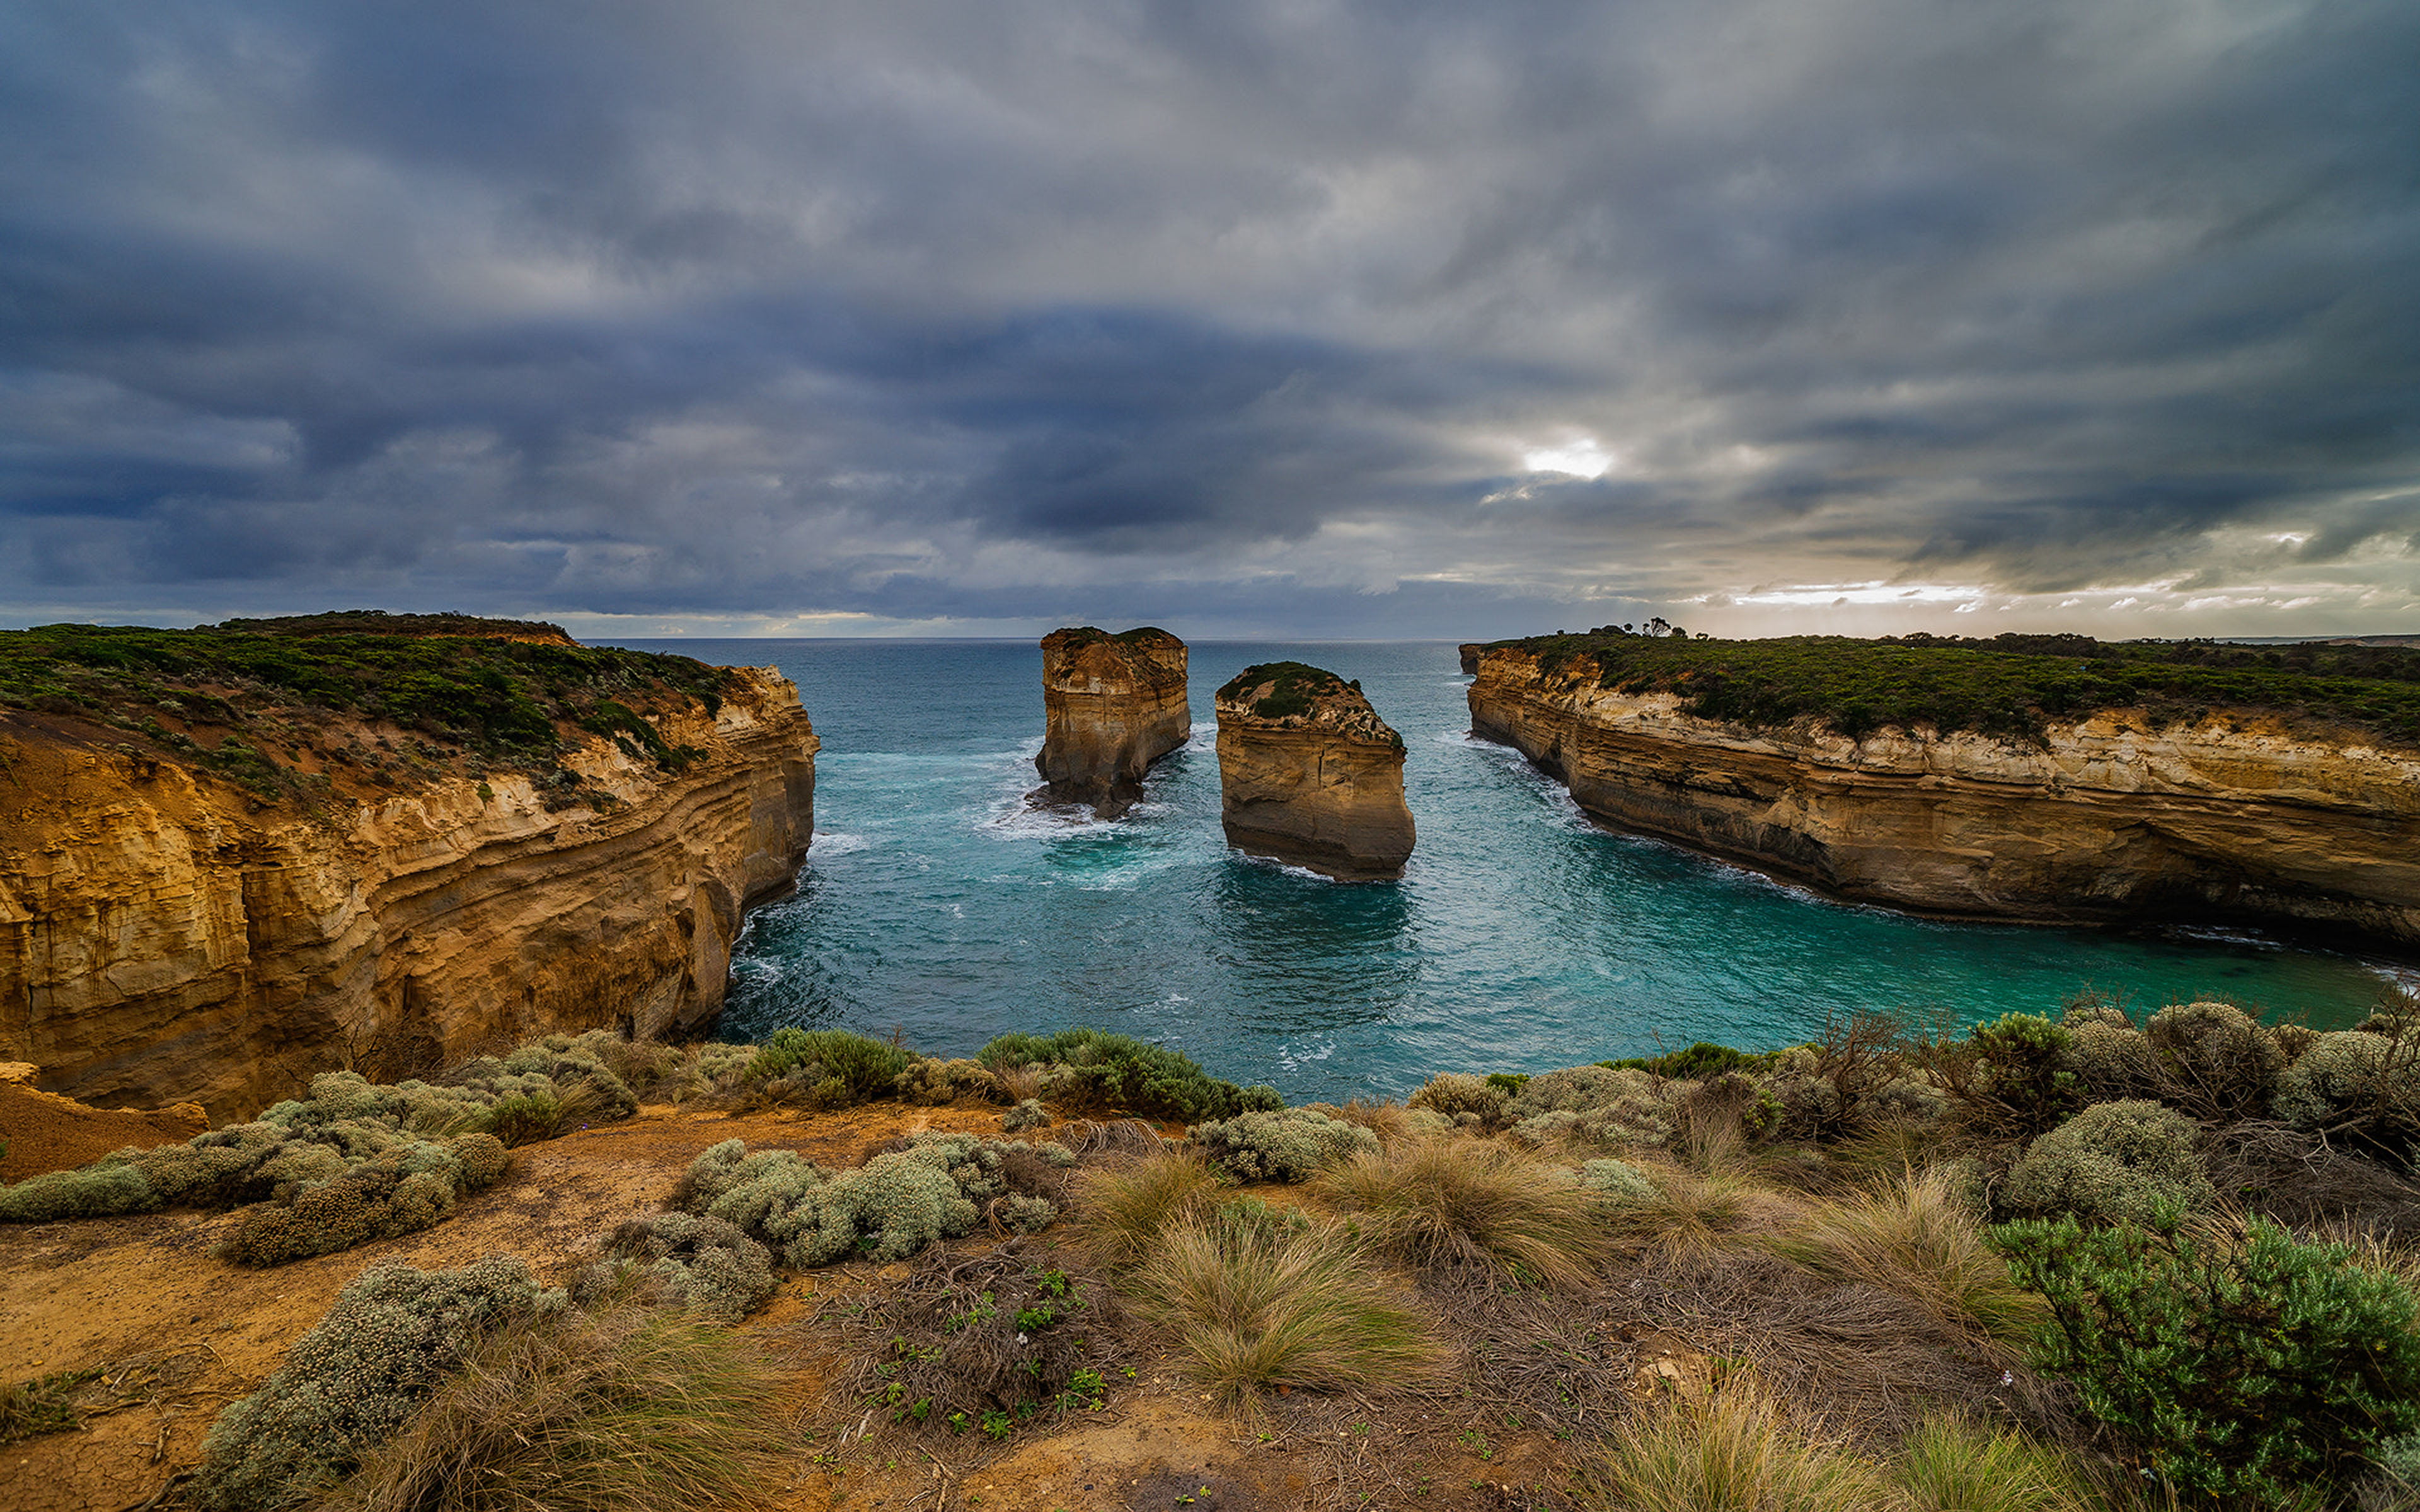 Loch Ard Gorge Is Located In Port Campbell National Park Victoria Australia Coast Desktop Hd Wallpapers For Mobile Phones And Computer 3840×2400